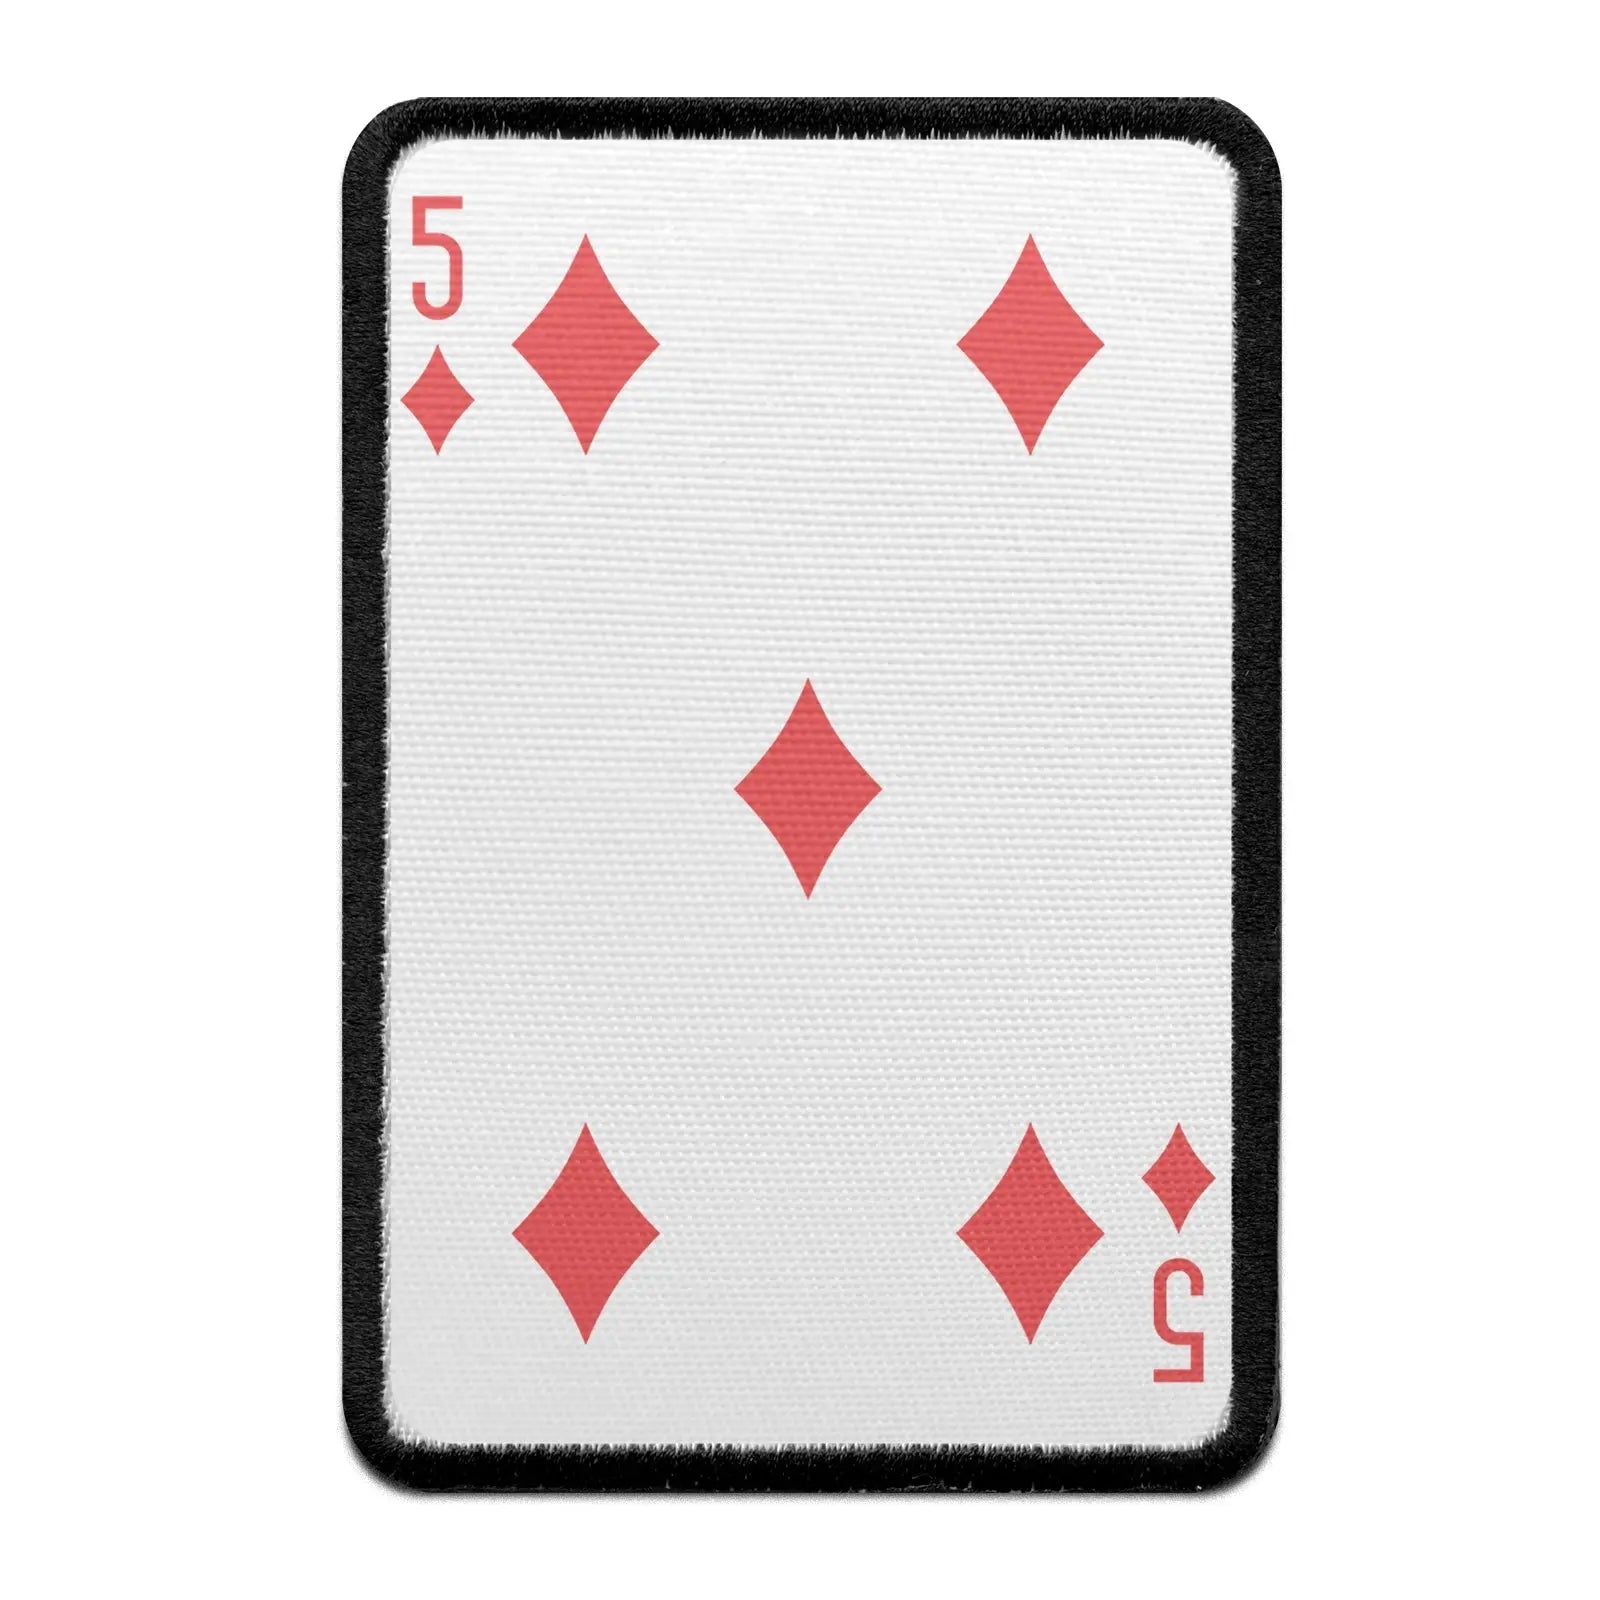 Five Of Diamonds Card FotoPatch Game Deck Embroidered Iron On 